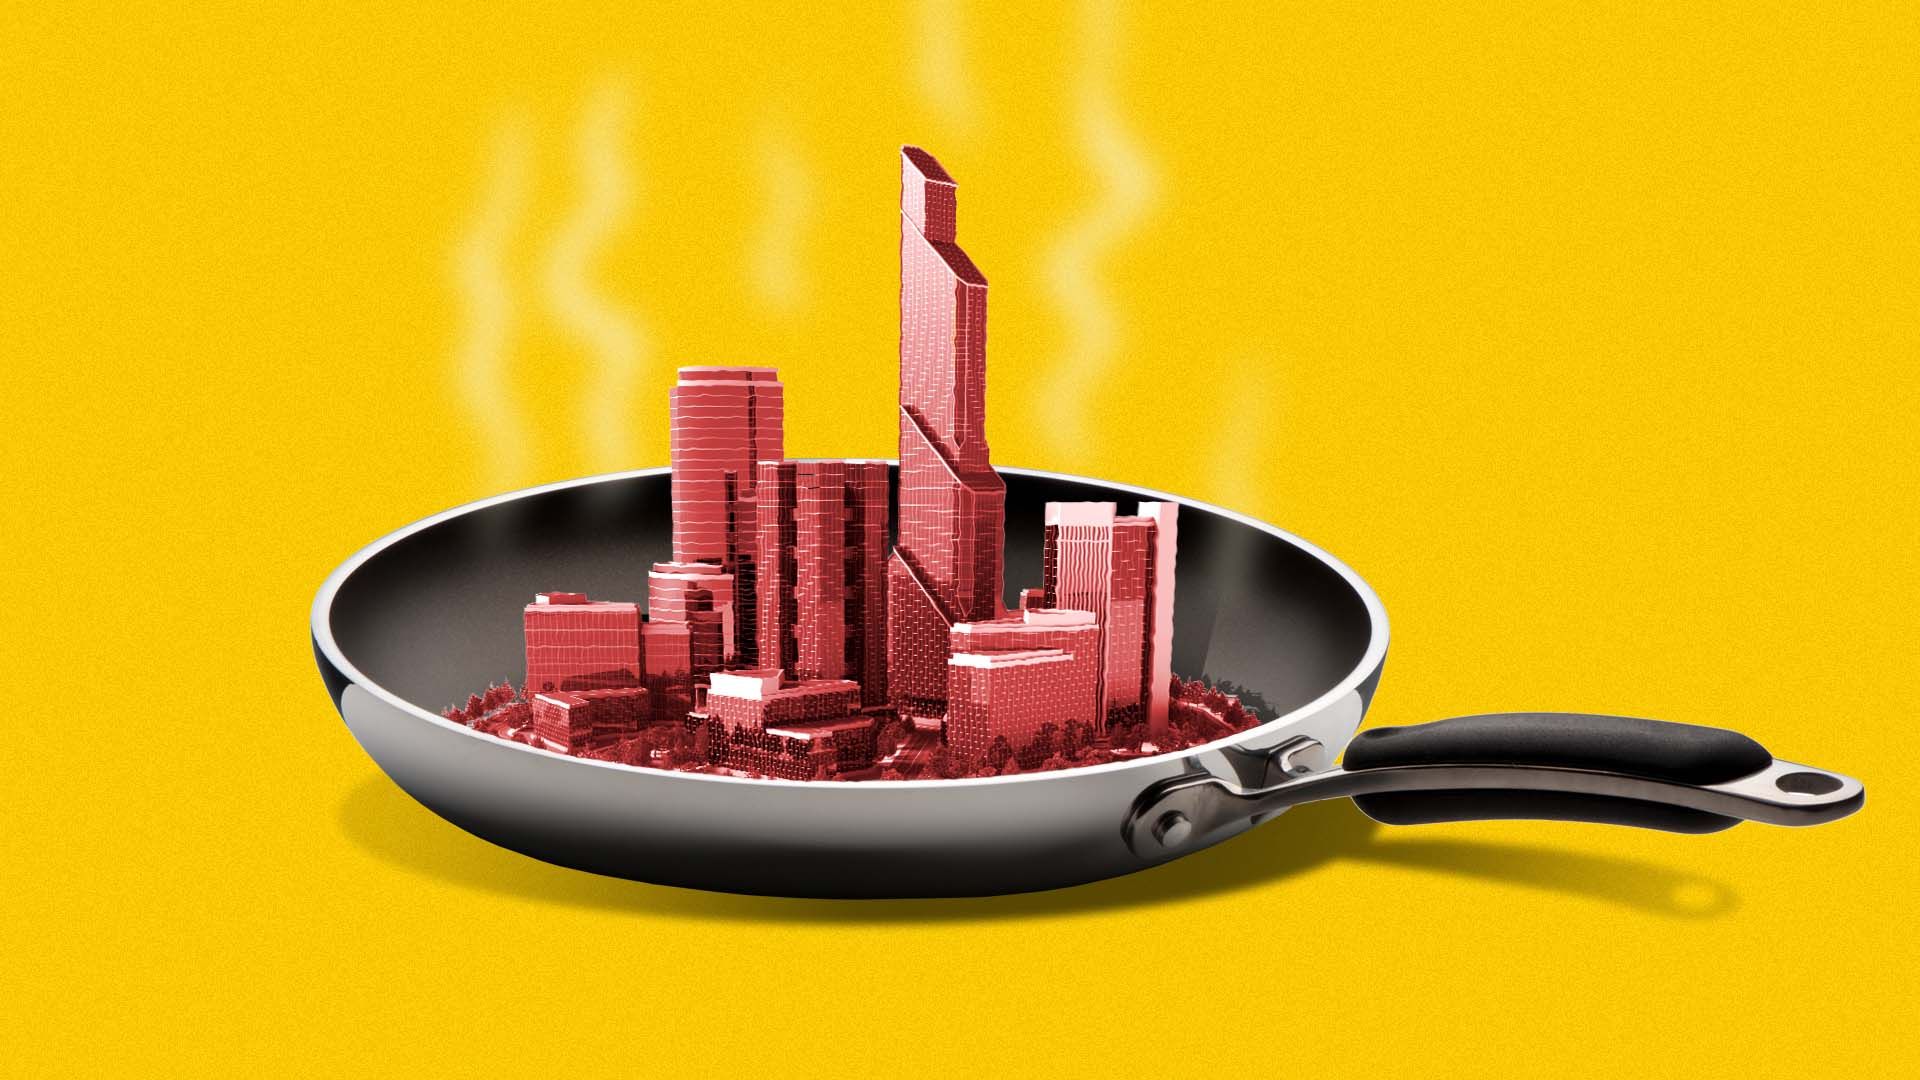 Illustration of a small city heating up in a skillet